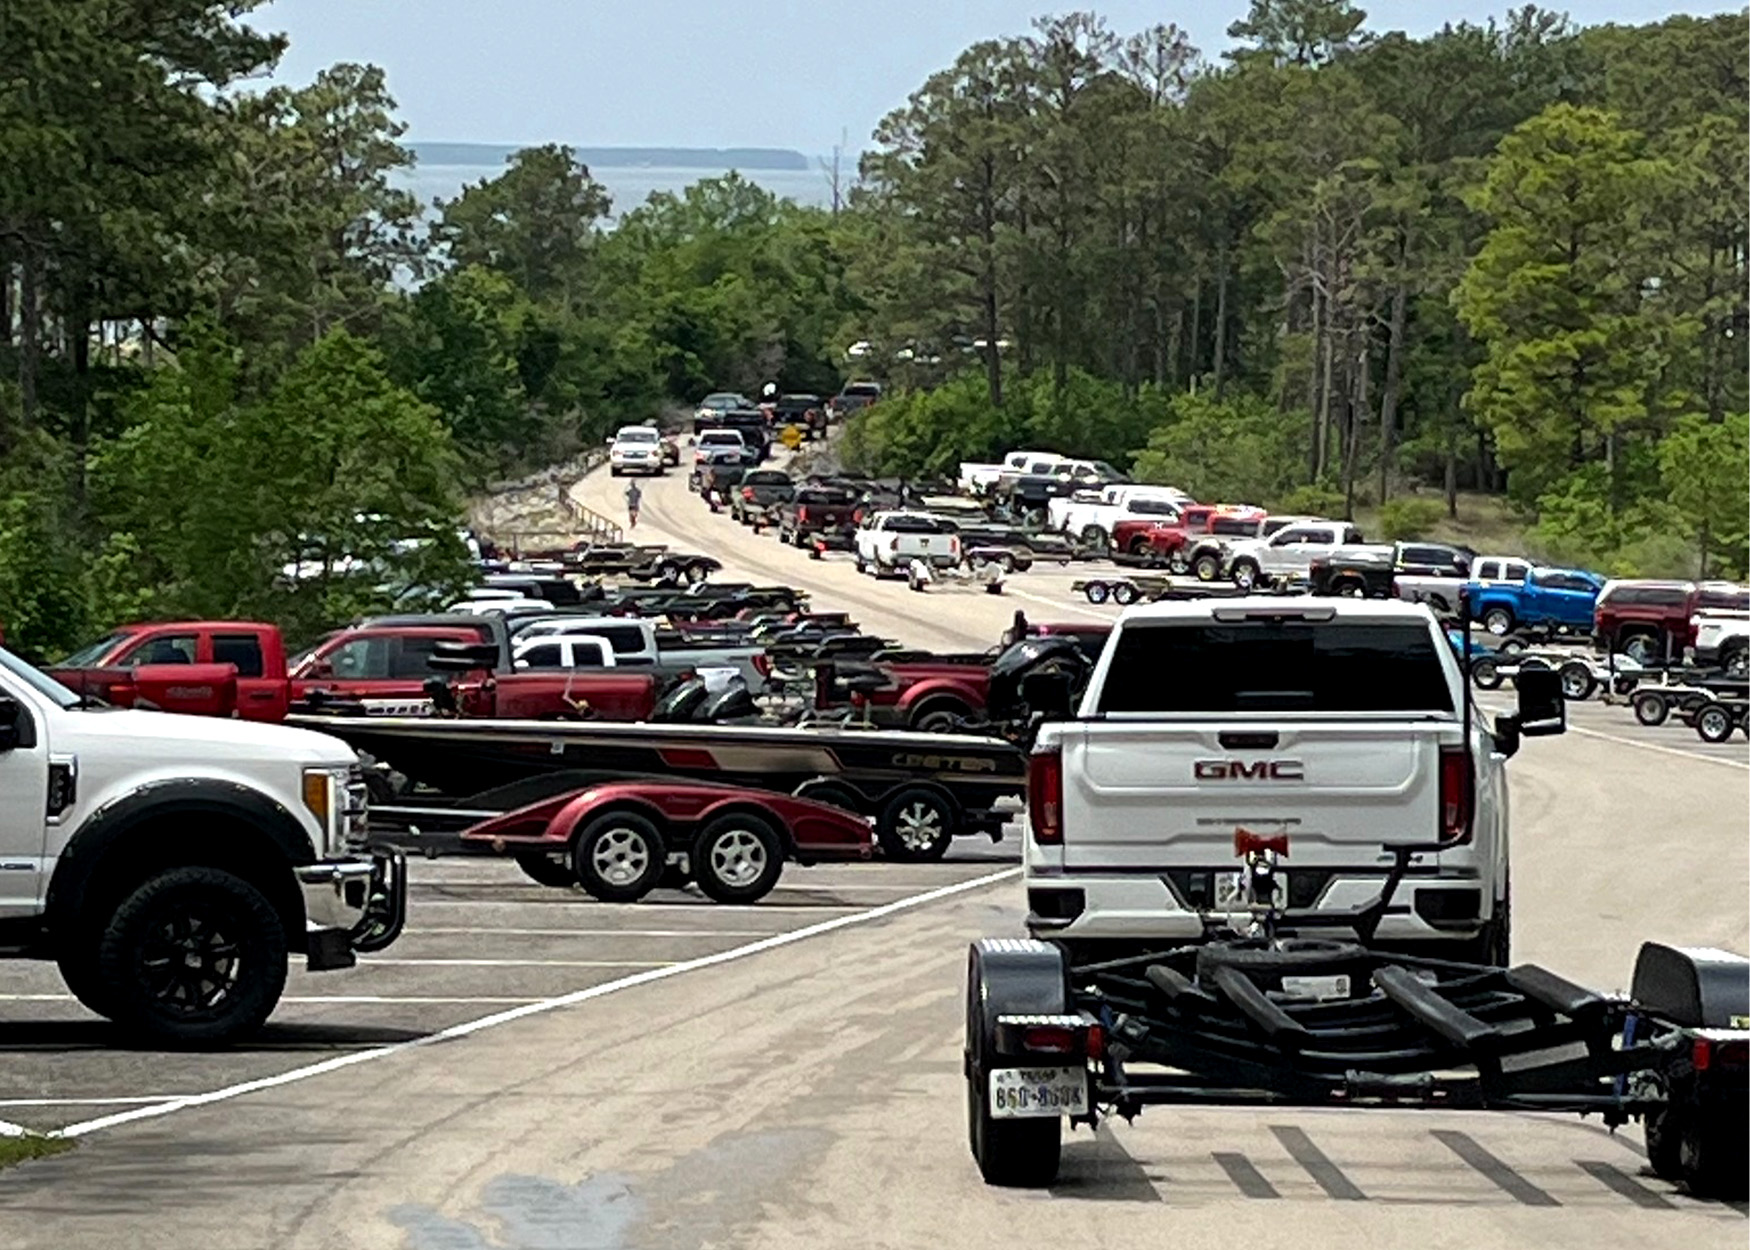 A line of boats and trailers at a fishing tournament.